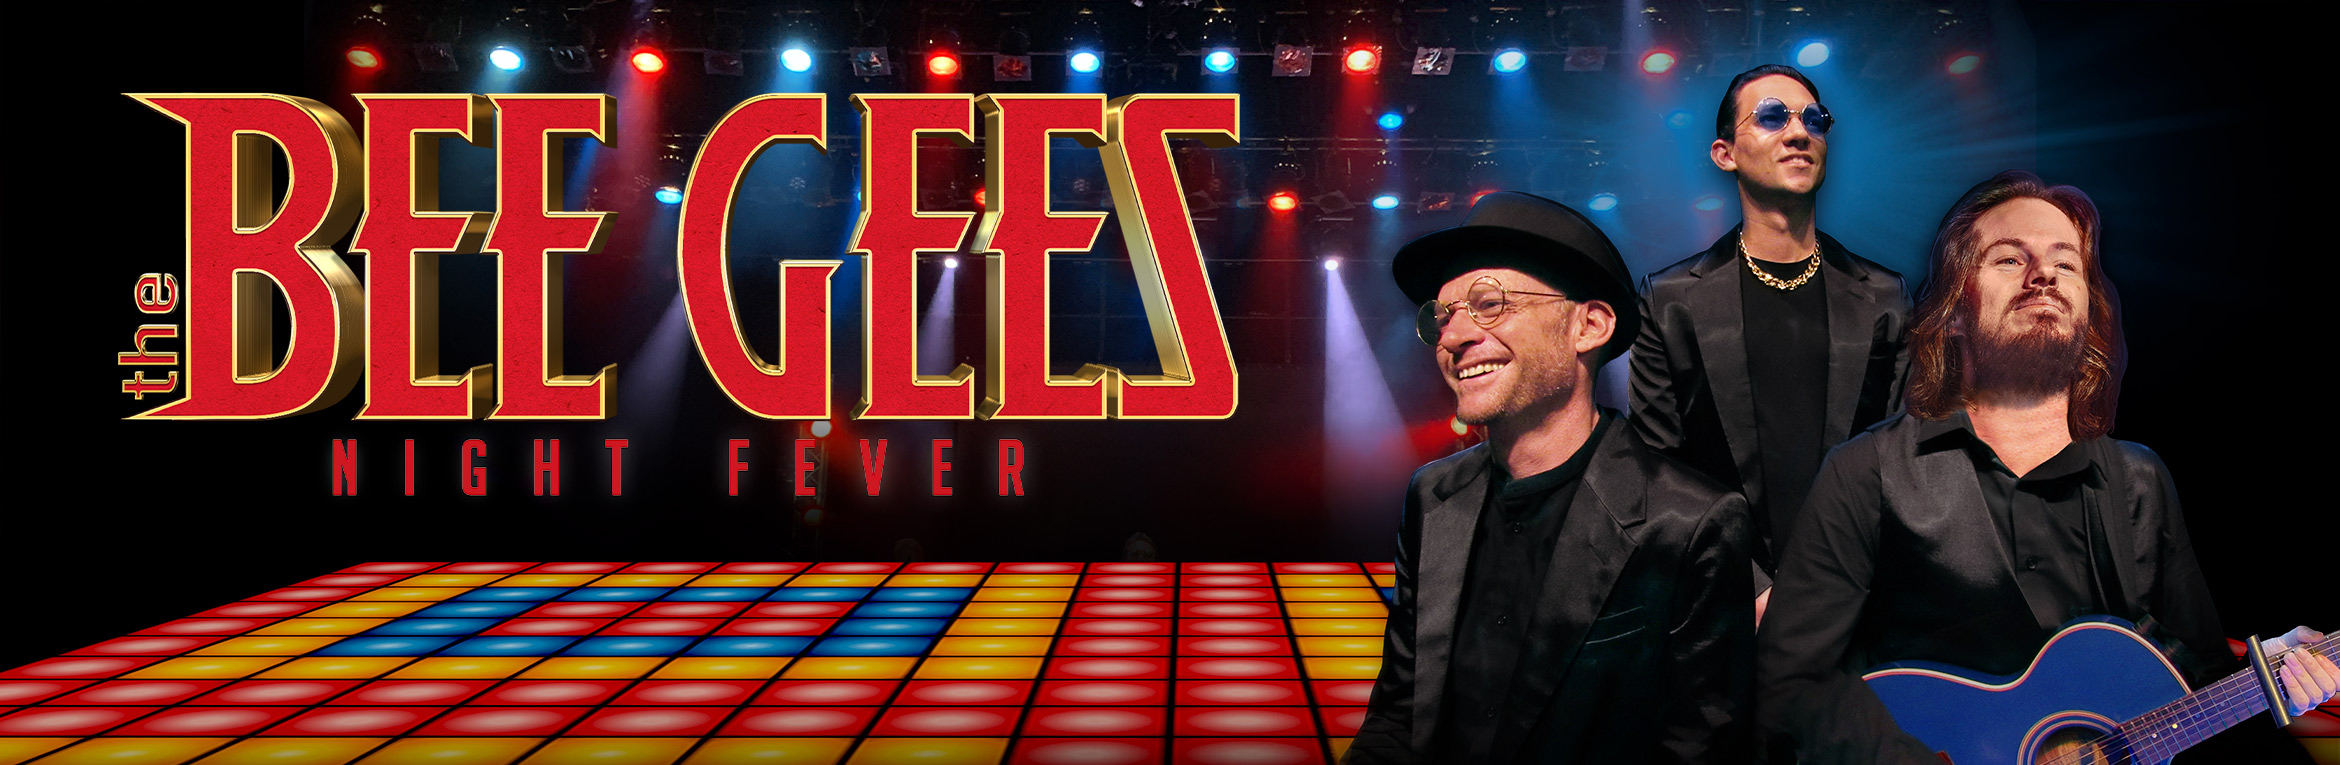 Bee Gees Night Fever